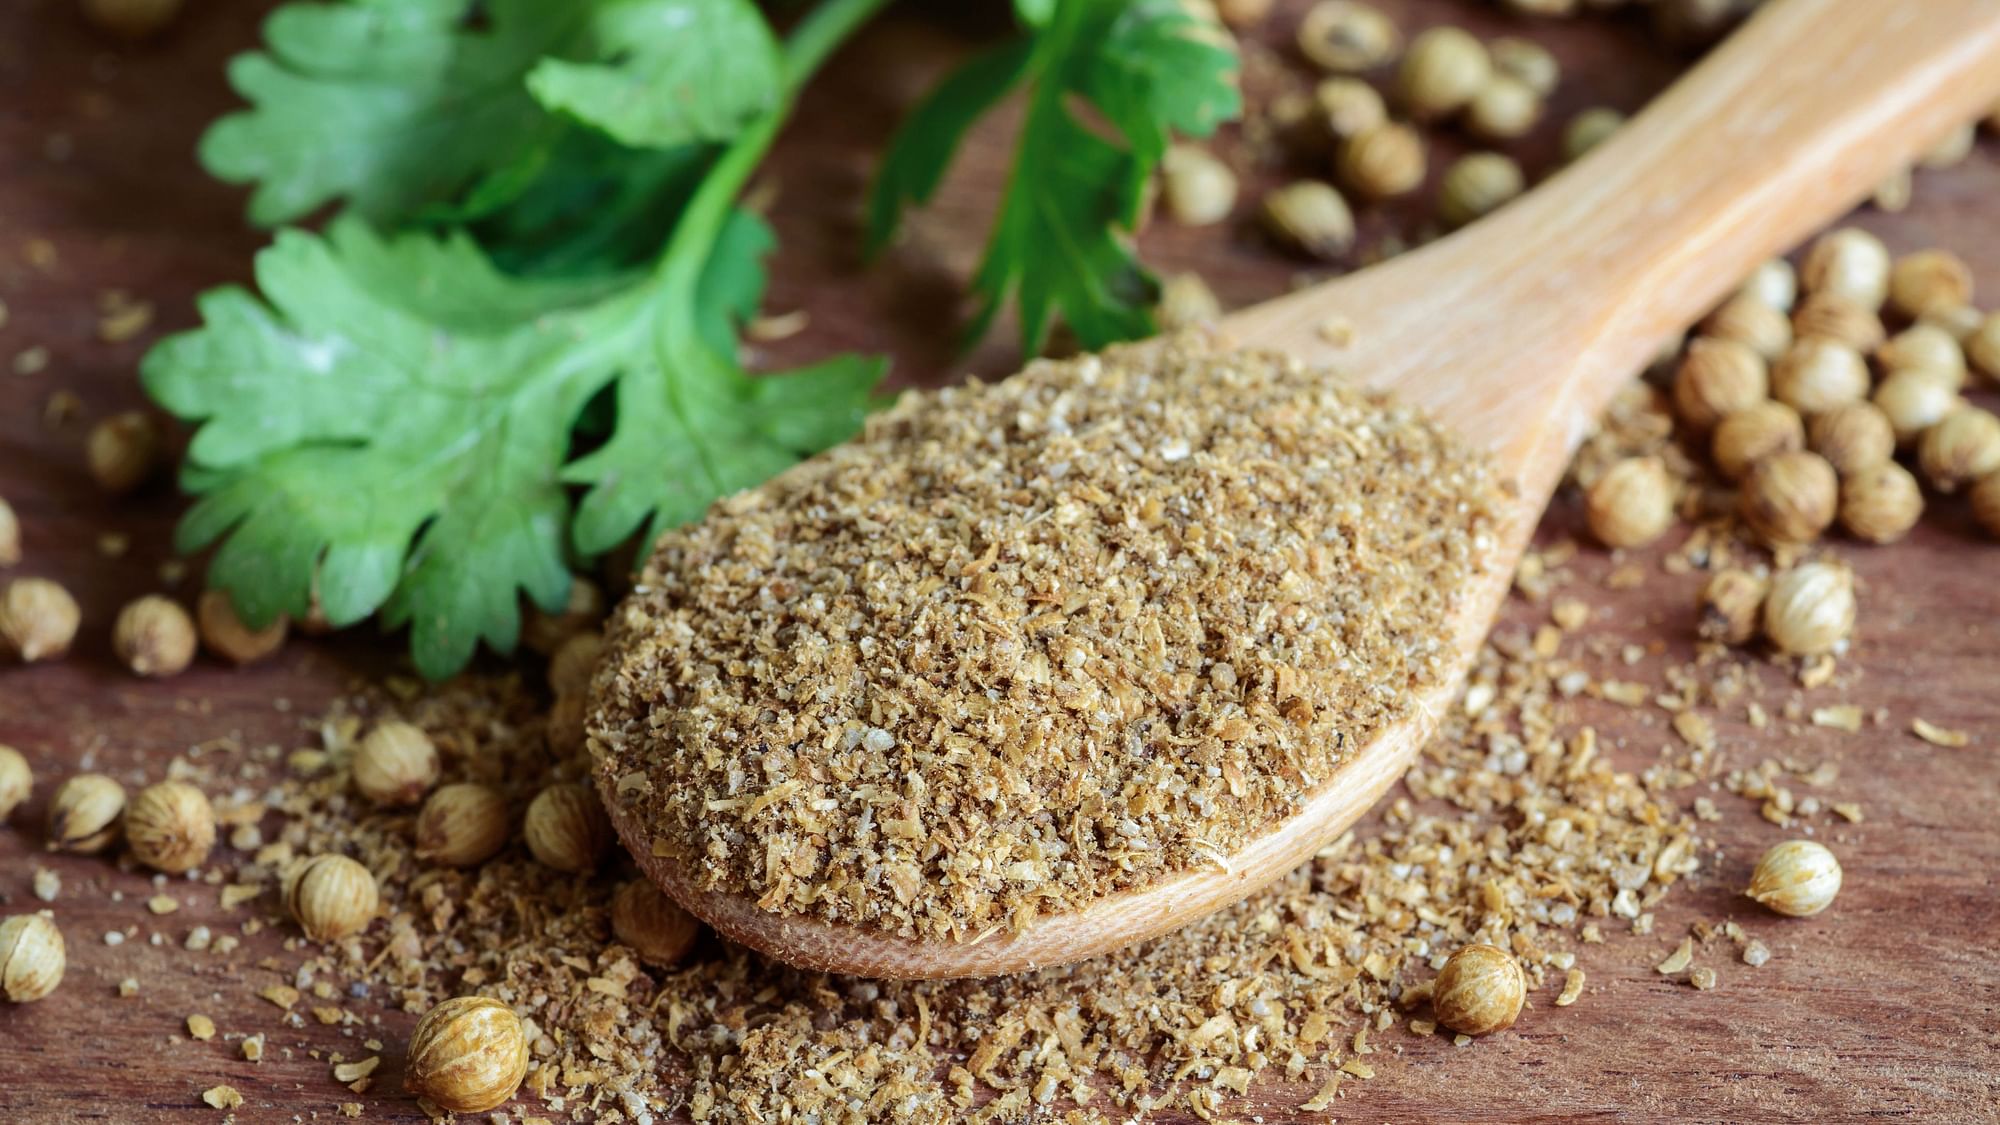 The main use of coriander seeds is in cooking, featuring prominently among all major world cuisines. 